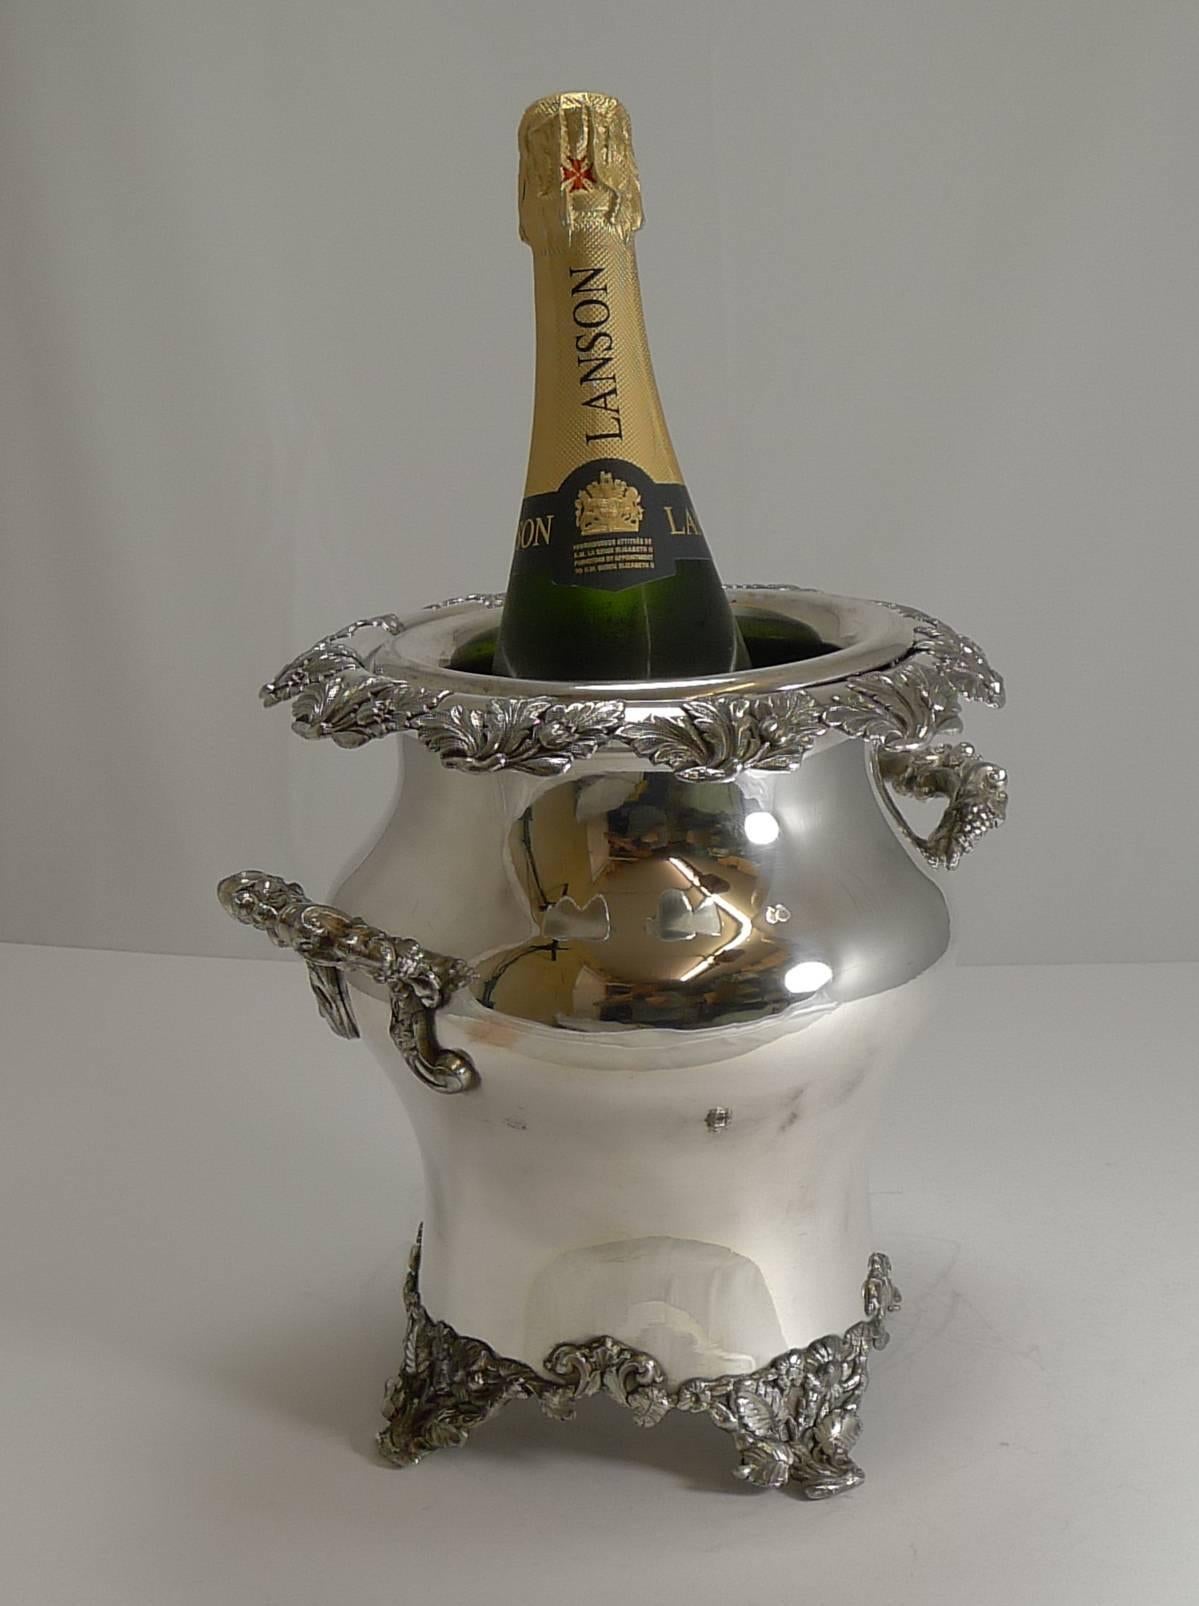 Silver Plate Antique English Old Sheffield Plate Wine Cooler, circa 1840